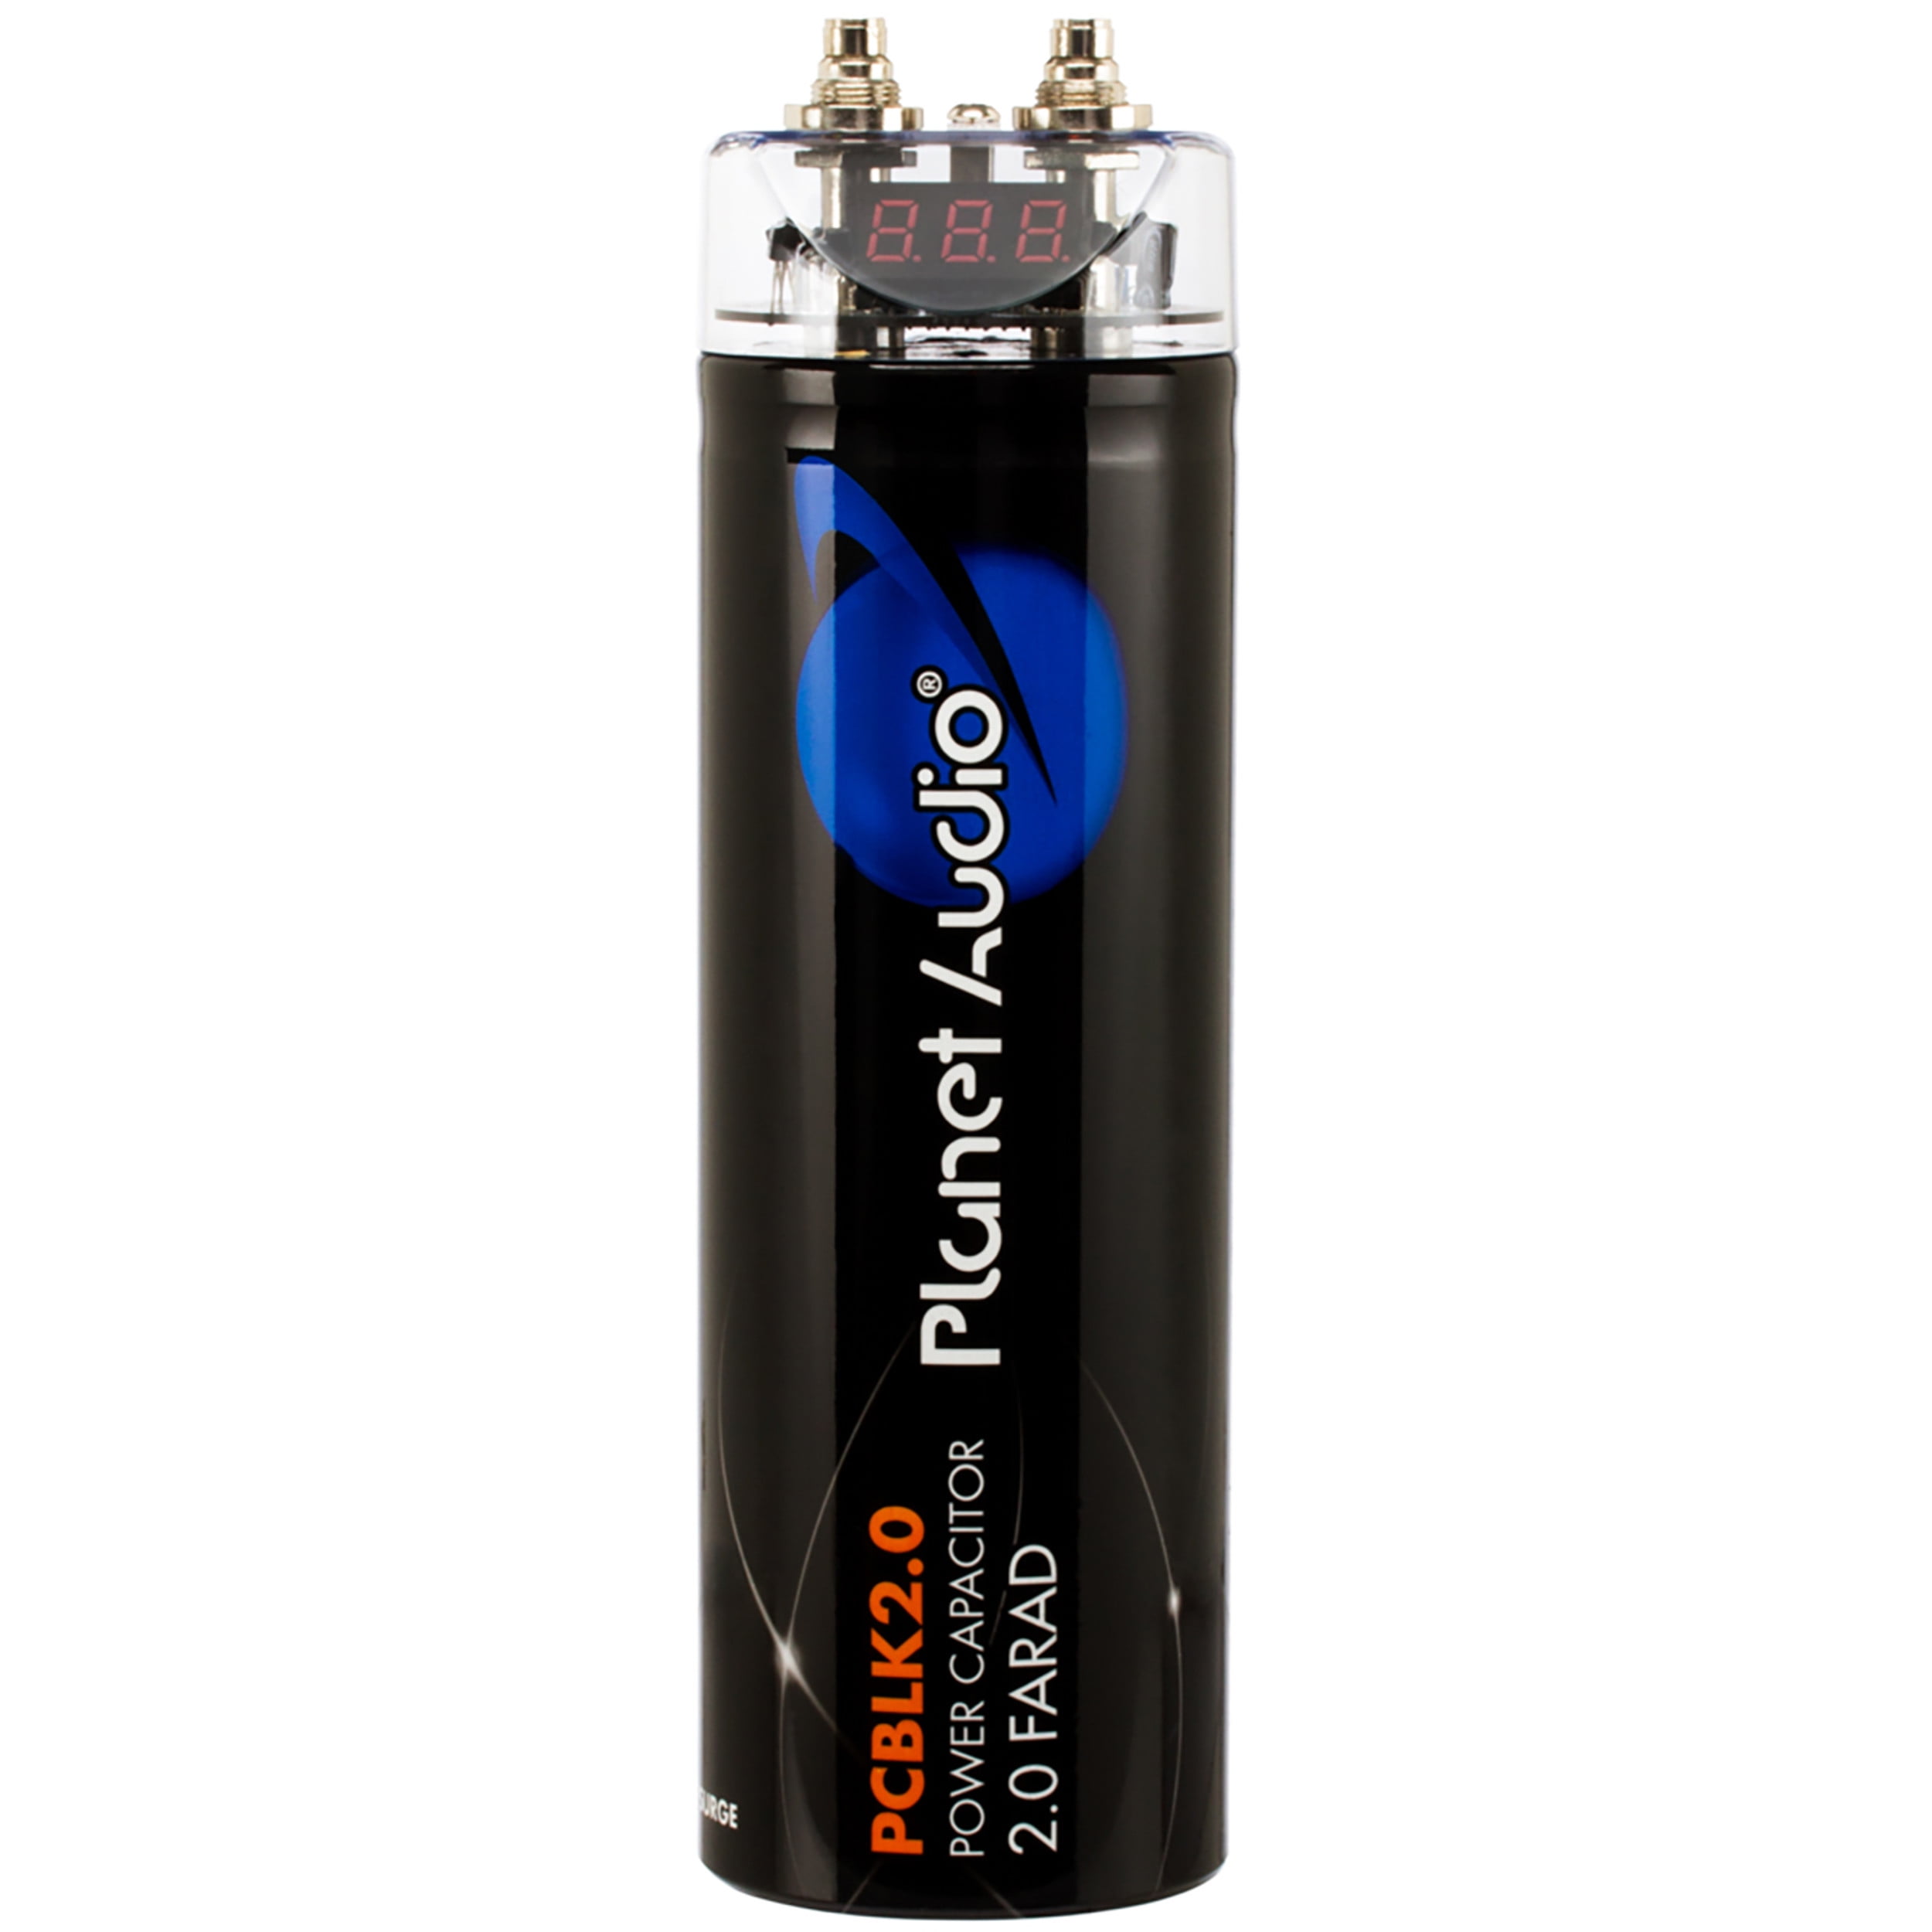 Planet Audio PCBLK2.0 – 2 Farad Car Capacitor for Energy Storage to Enhance  Bass Demand from Audio System